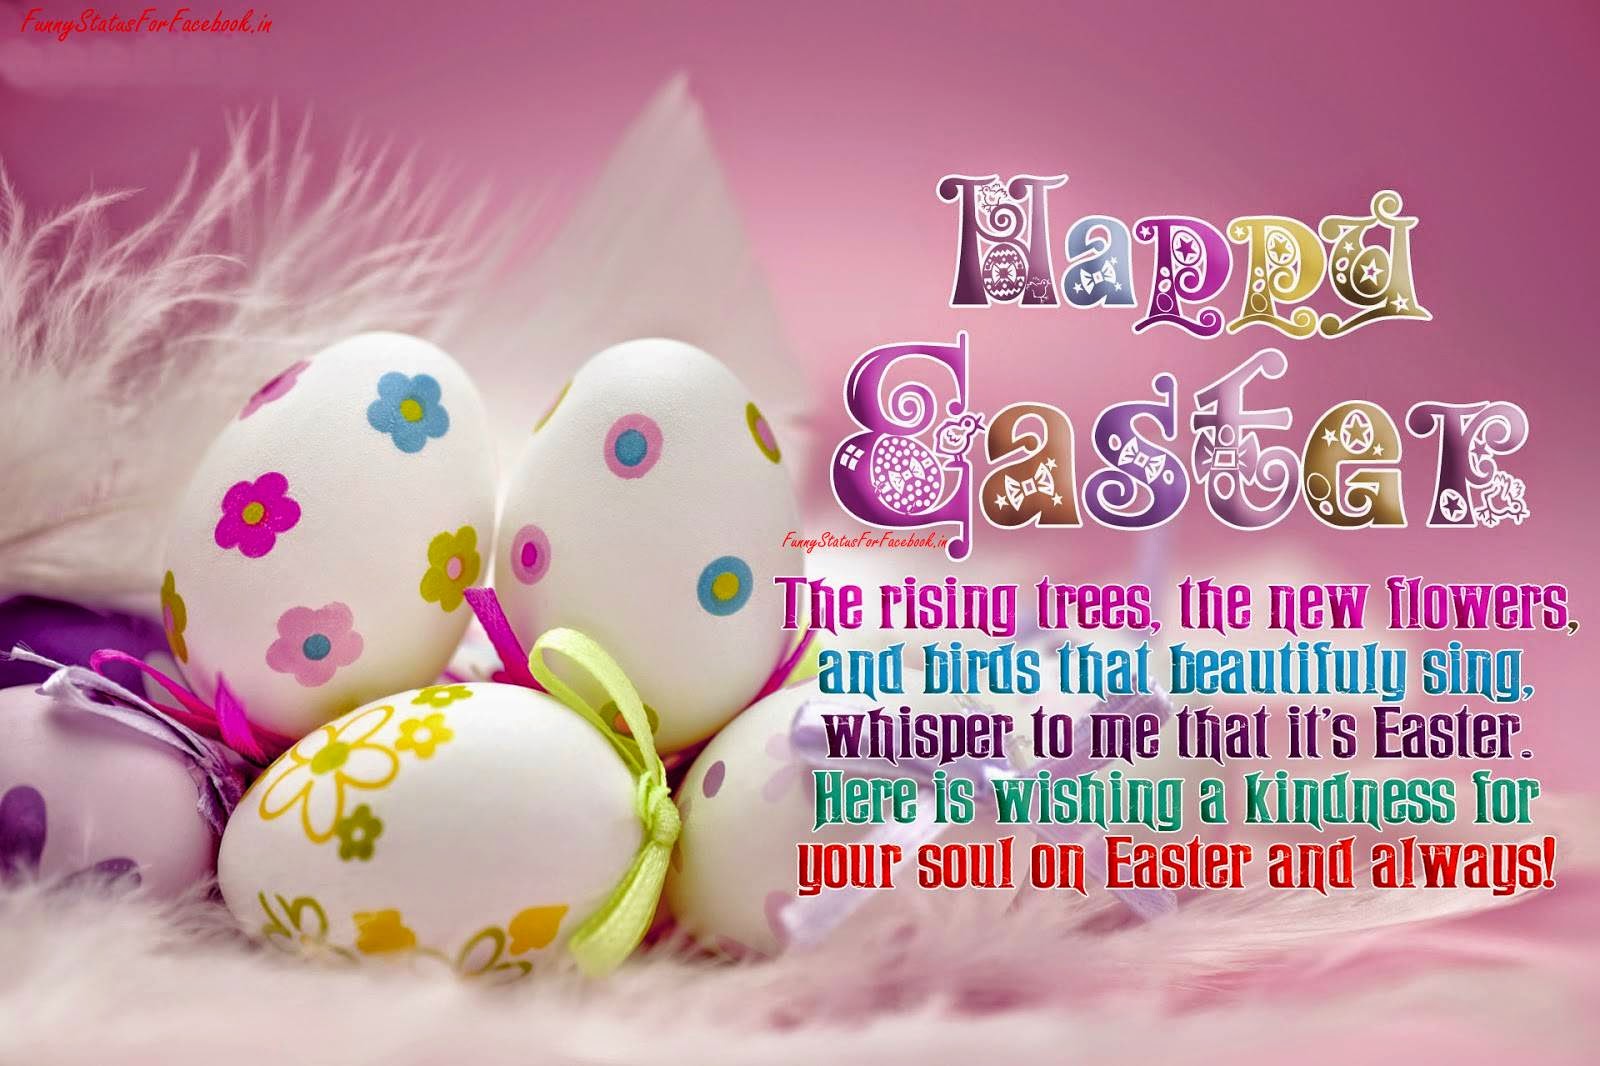 Latest 60+ Famous Happy Easter Quotes & Sayings With Images & Cards